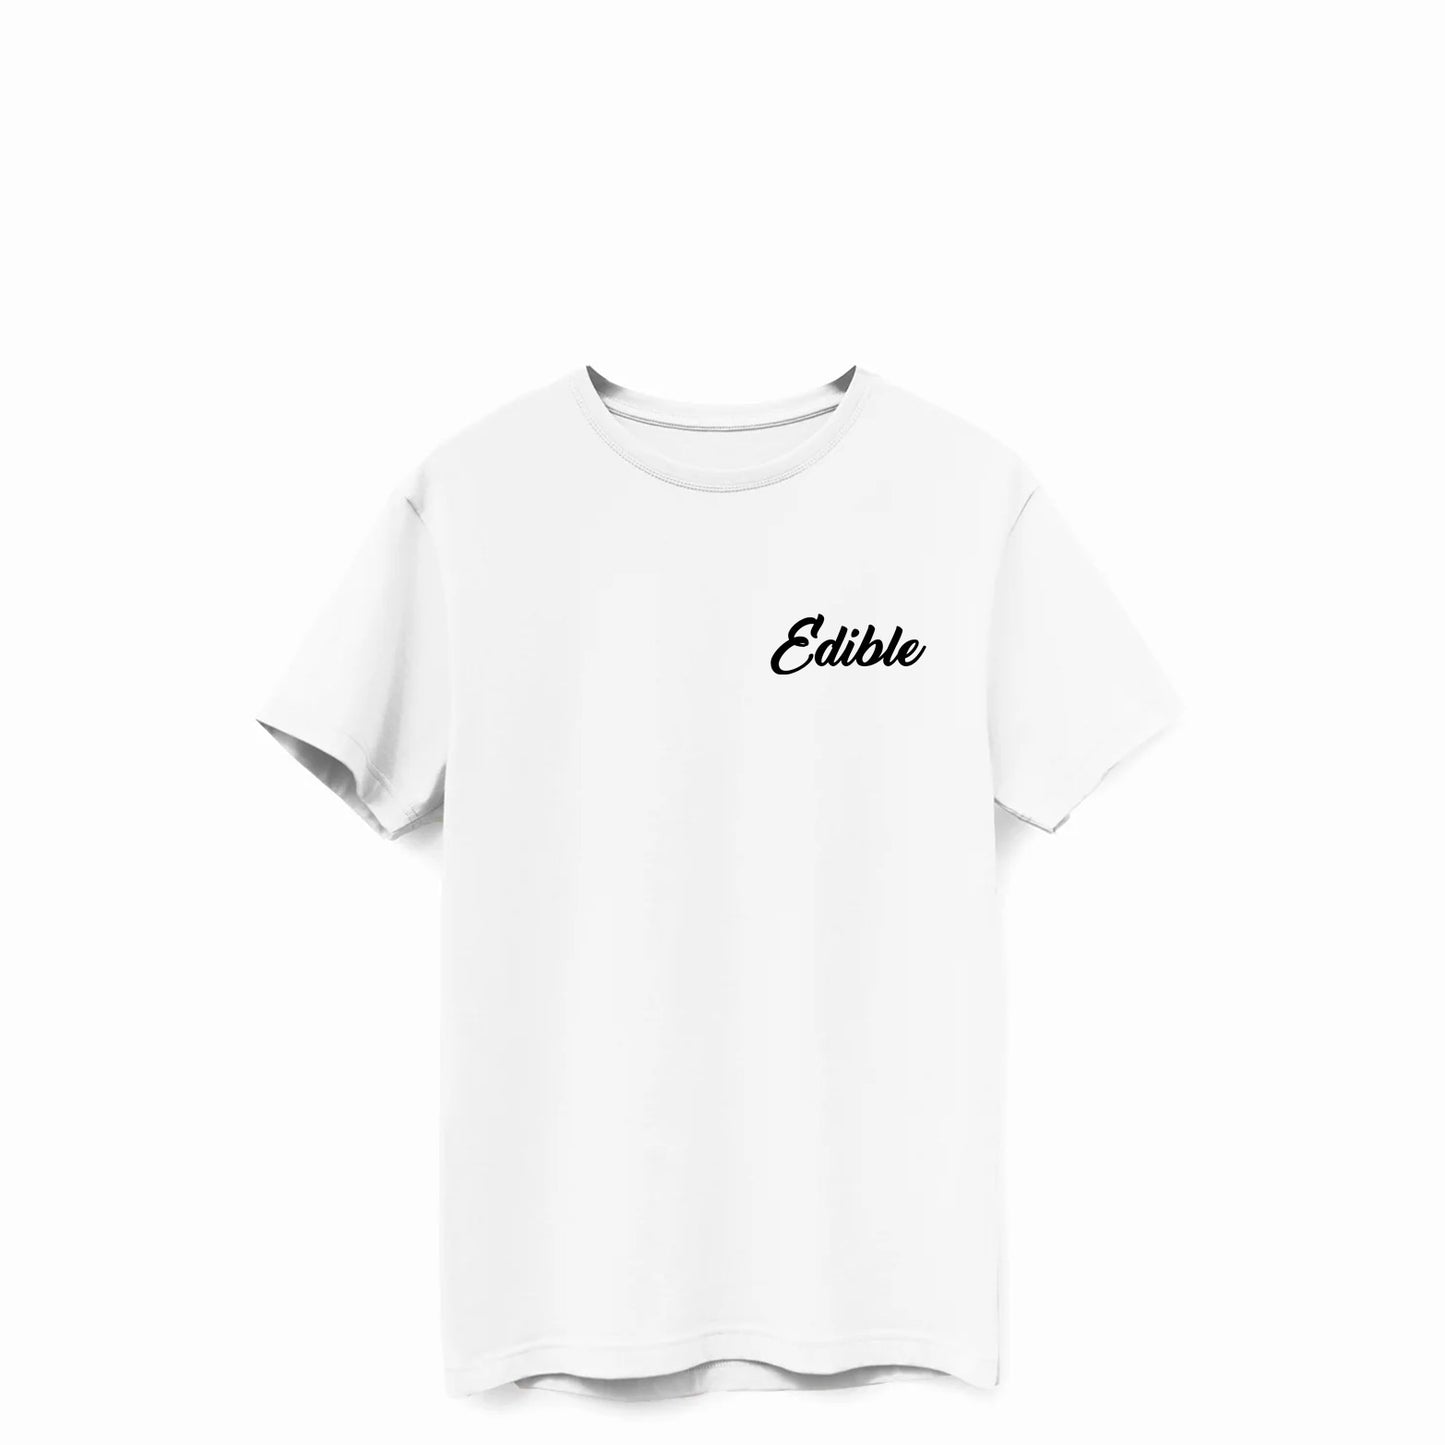 "Edible" Embroidered T-Shirt